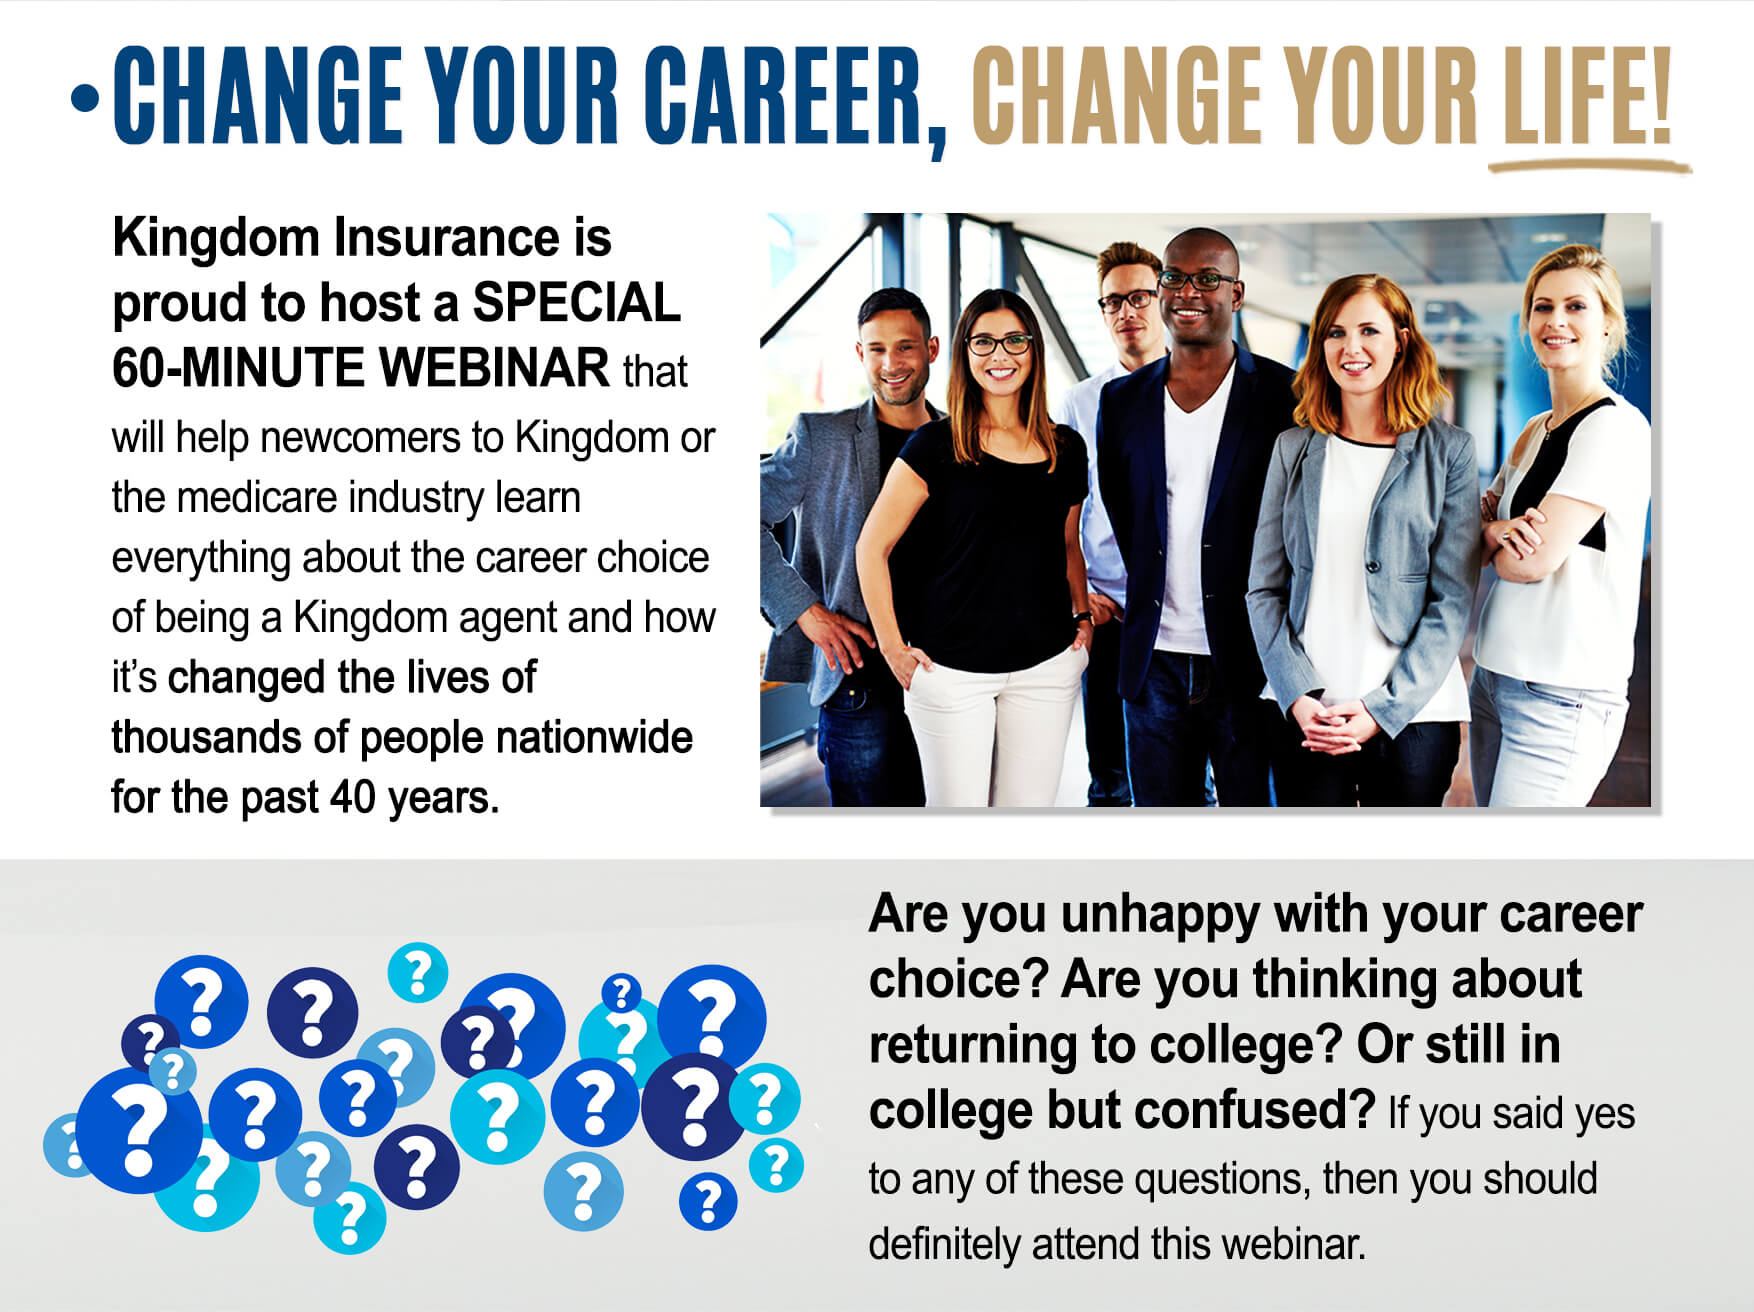 Change your career, change your life!